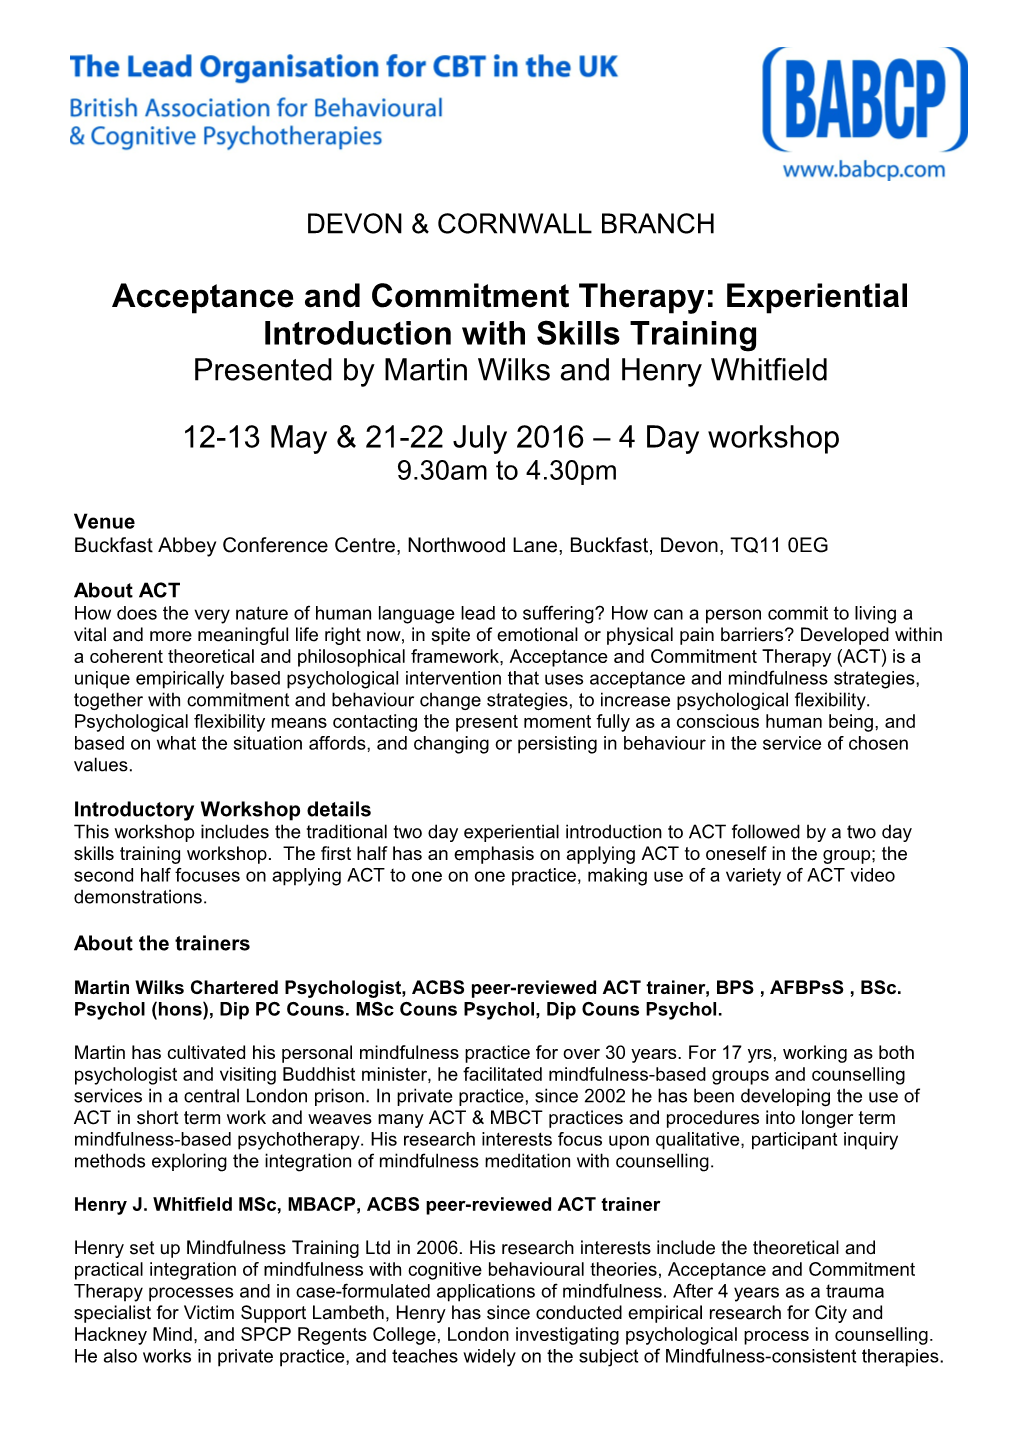 Acceptance and Commitment Therapy: Experiential Introduction with Skills Training